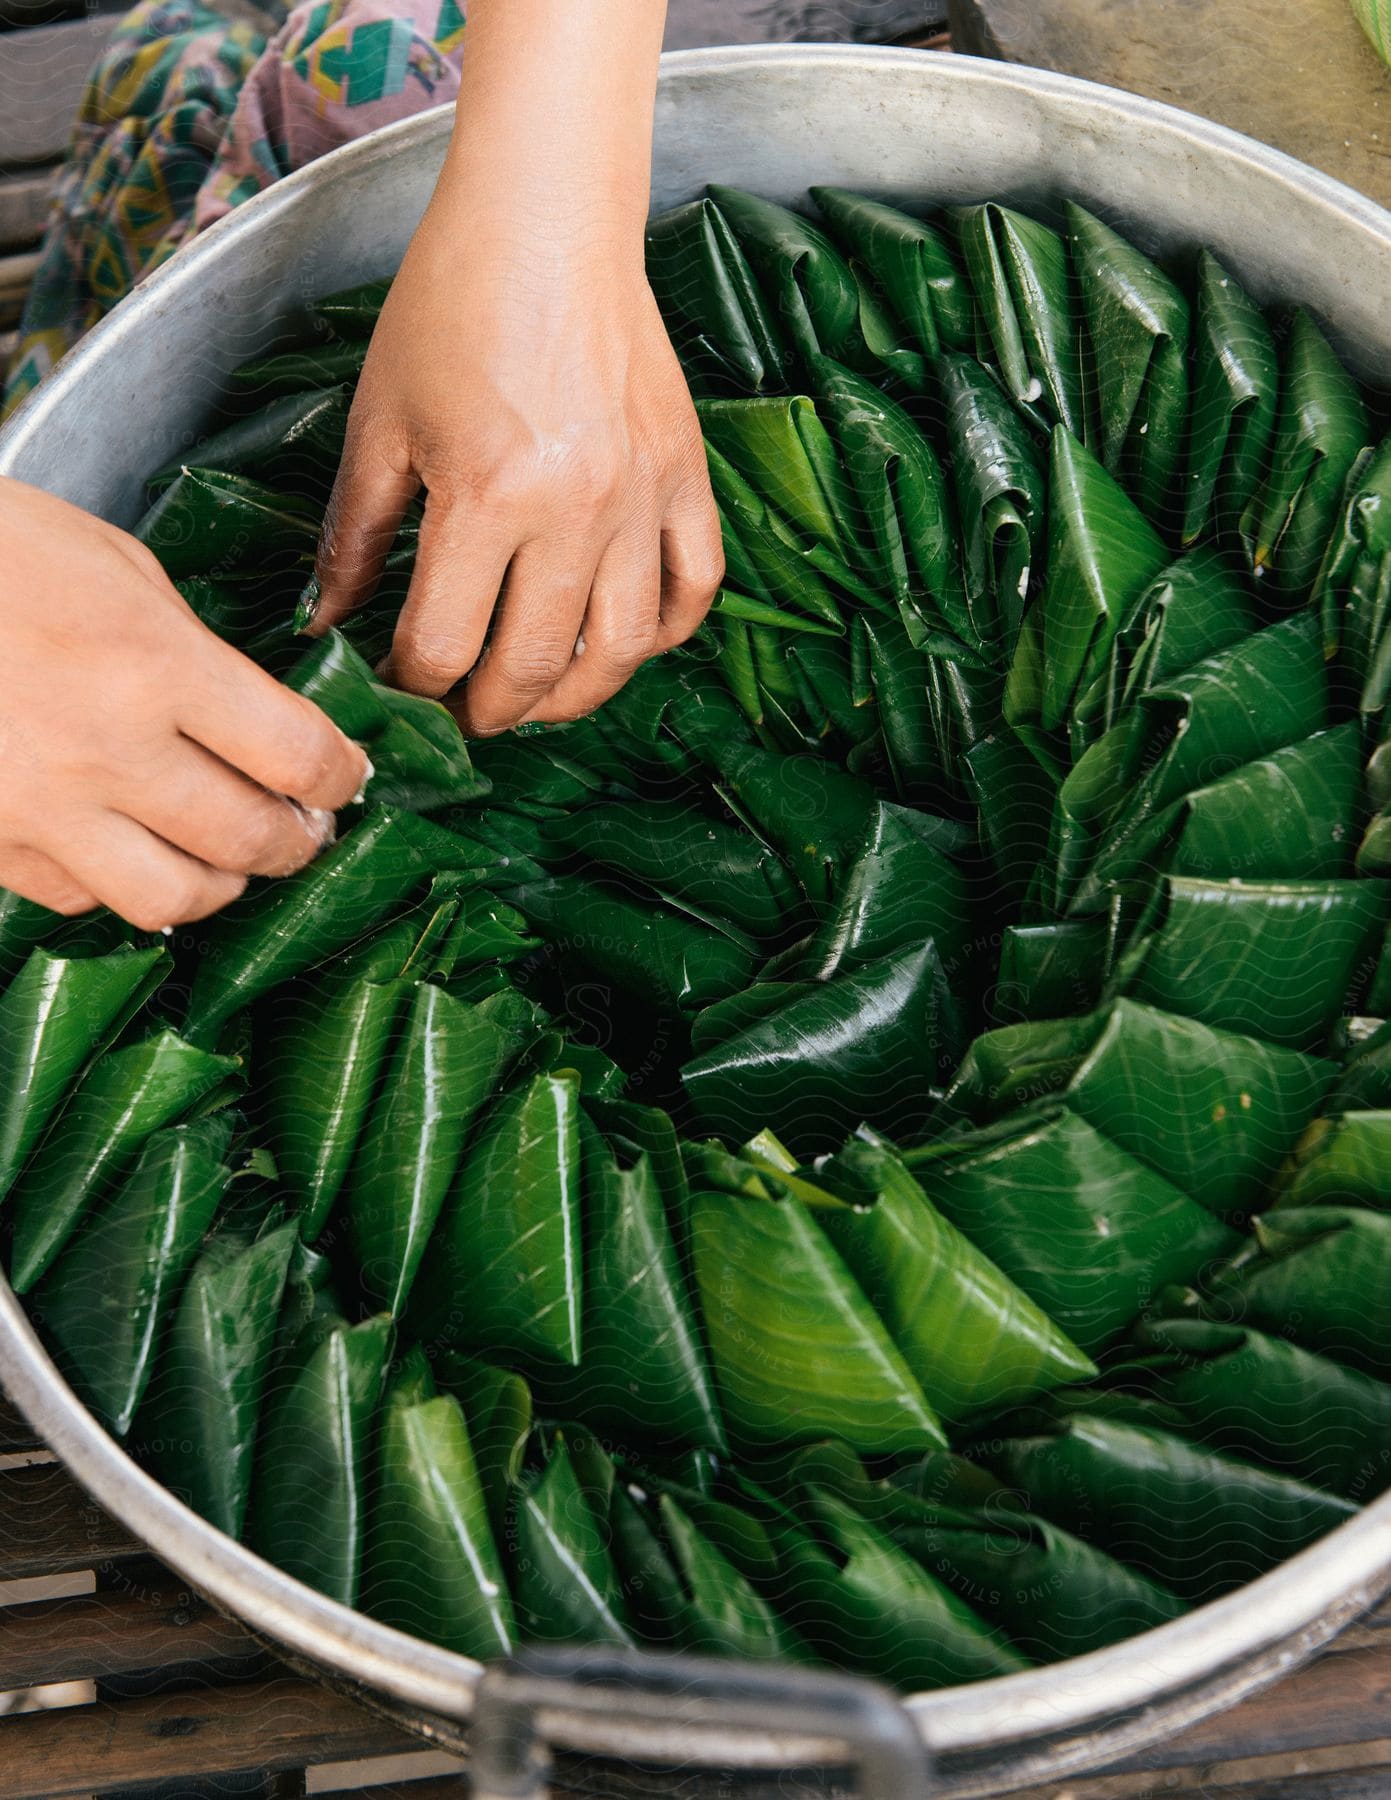 Banana leaves being prepared for cooking